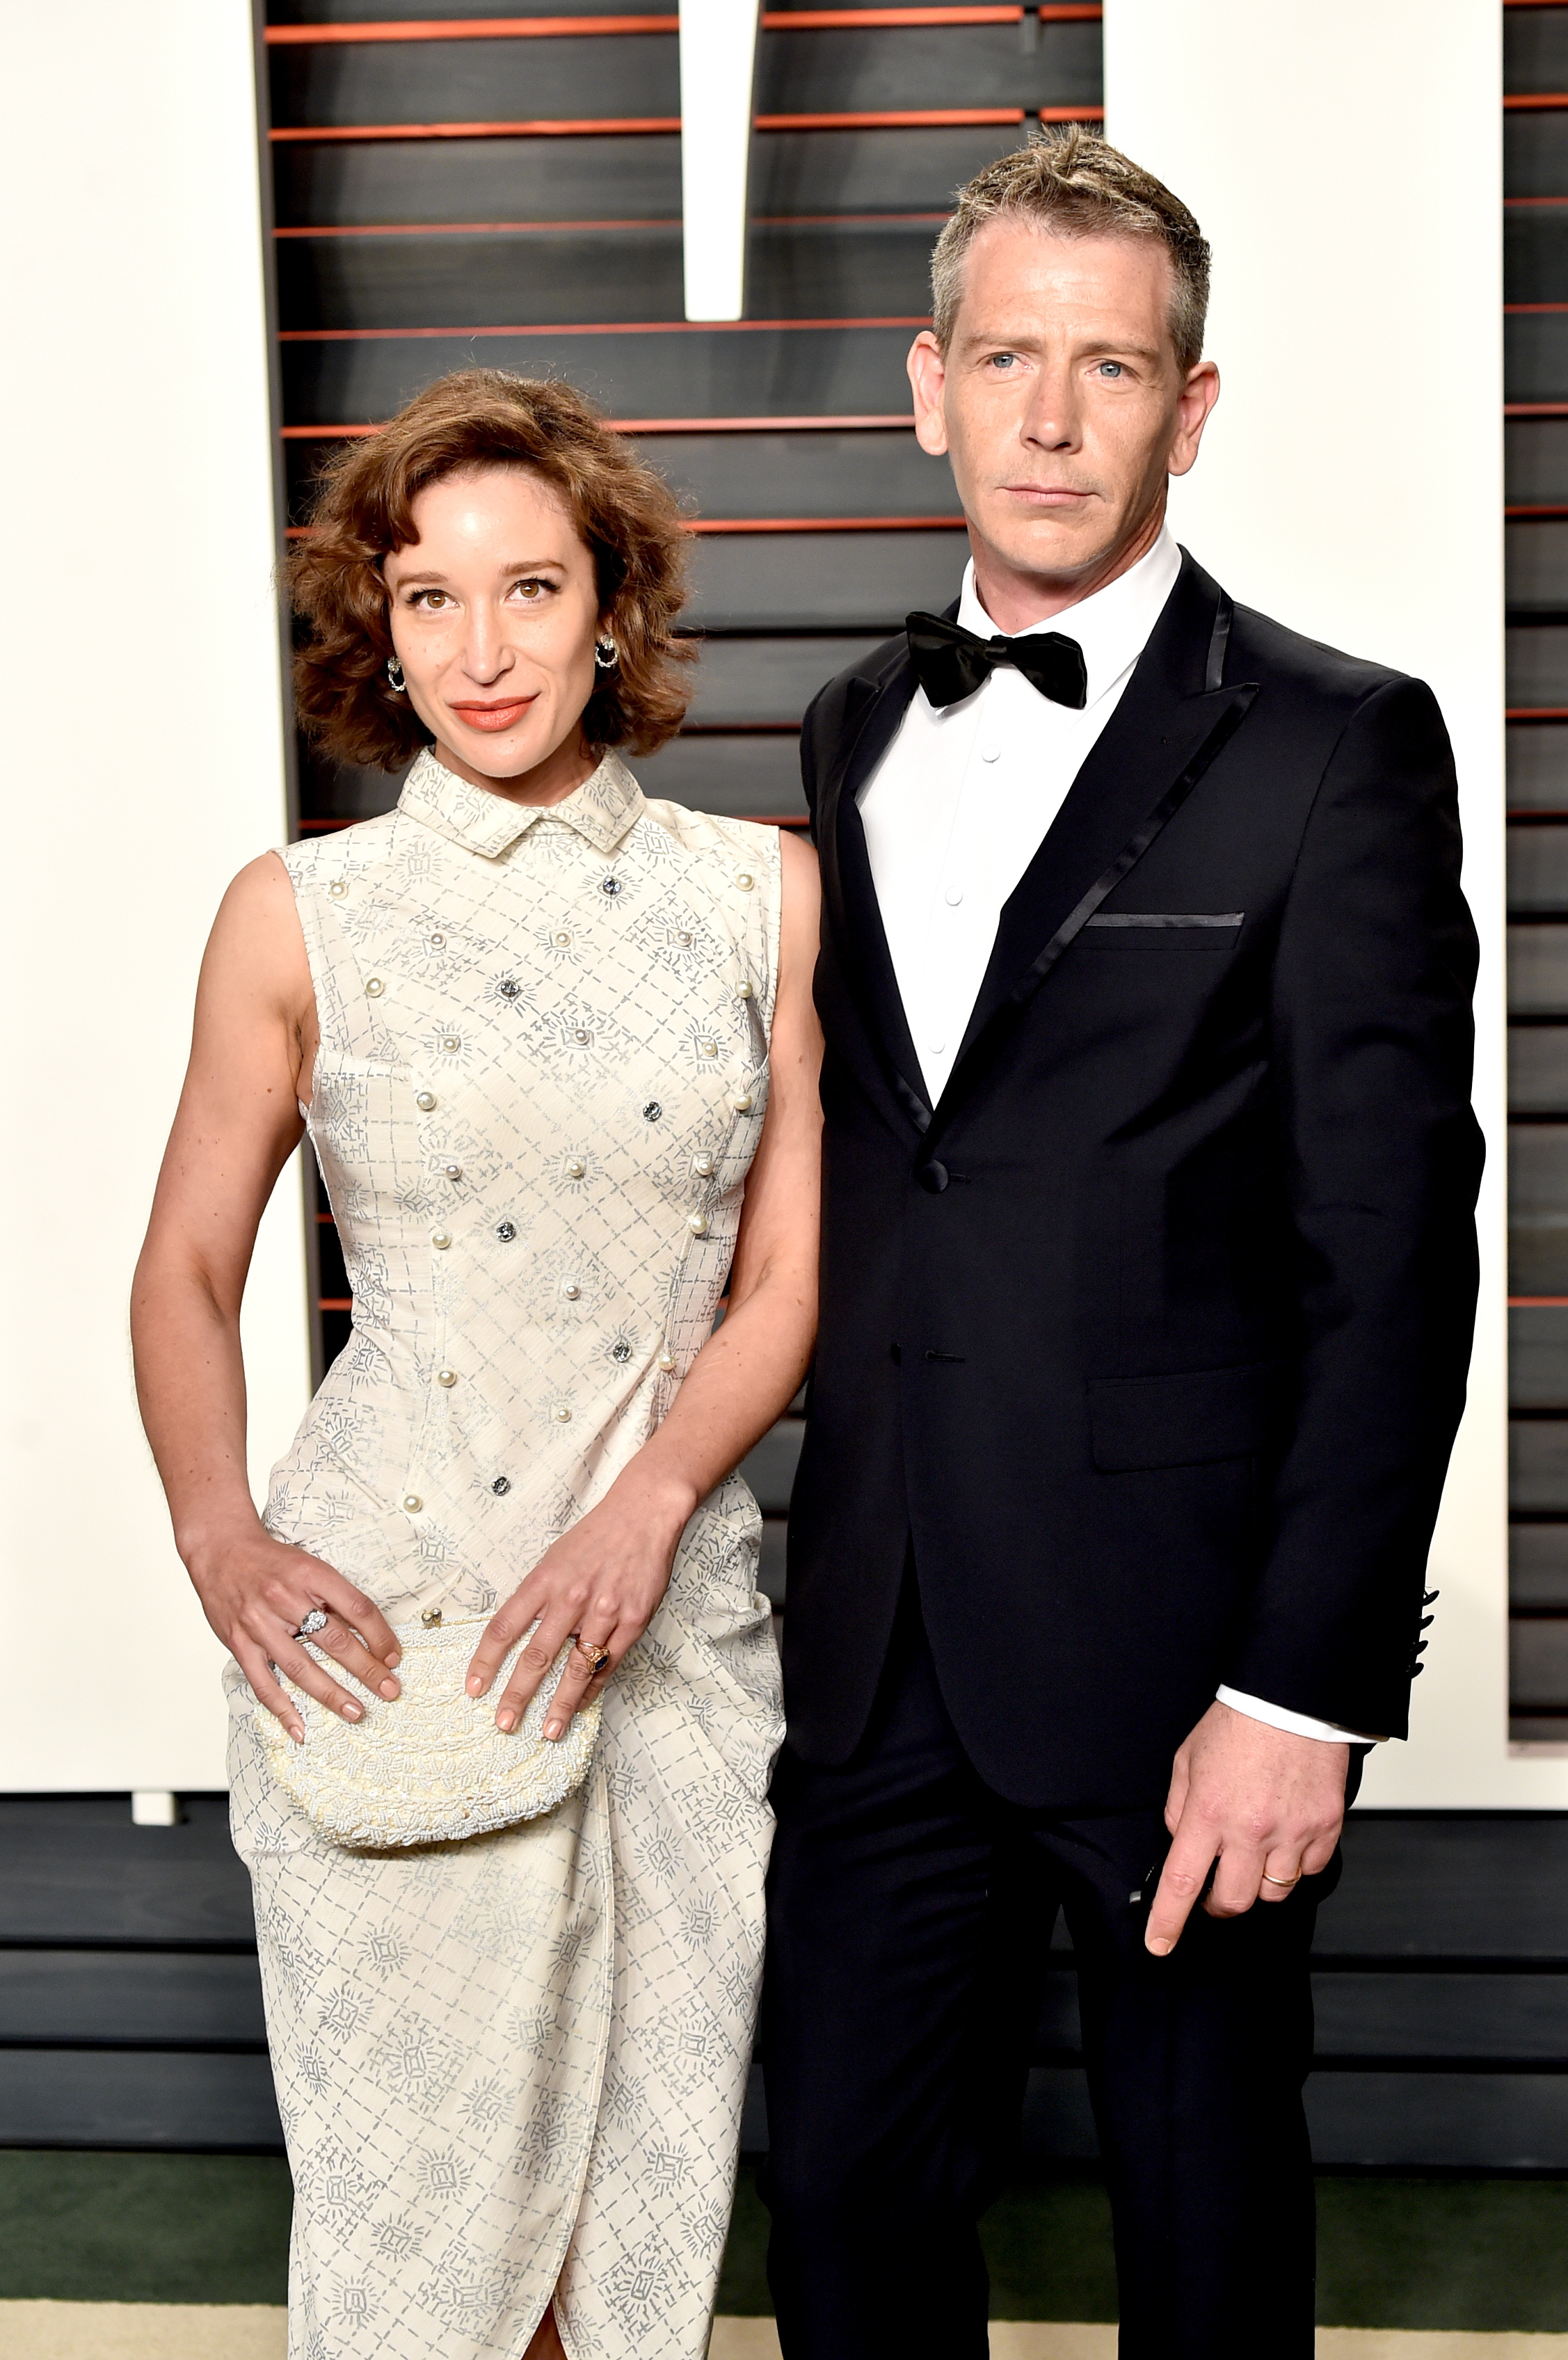 Emma Forrest and Ben Mendelsohn at the 2016 Vanity Fair Oscar Party on February 28, 2016, in Beverly Hills, California. | Source: Getty Images